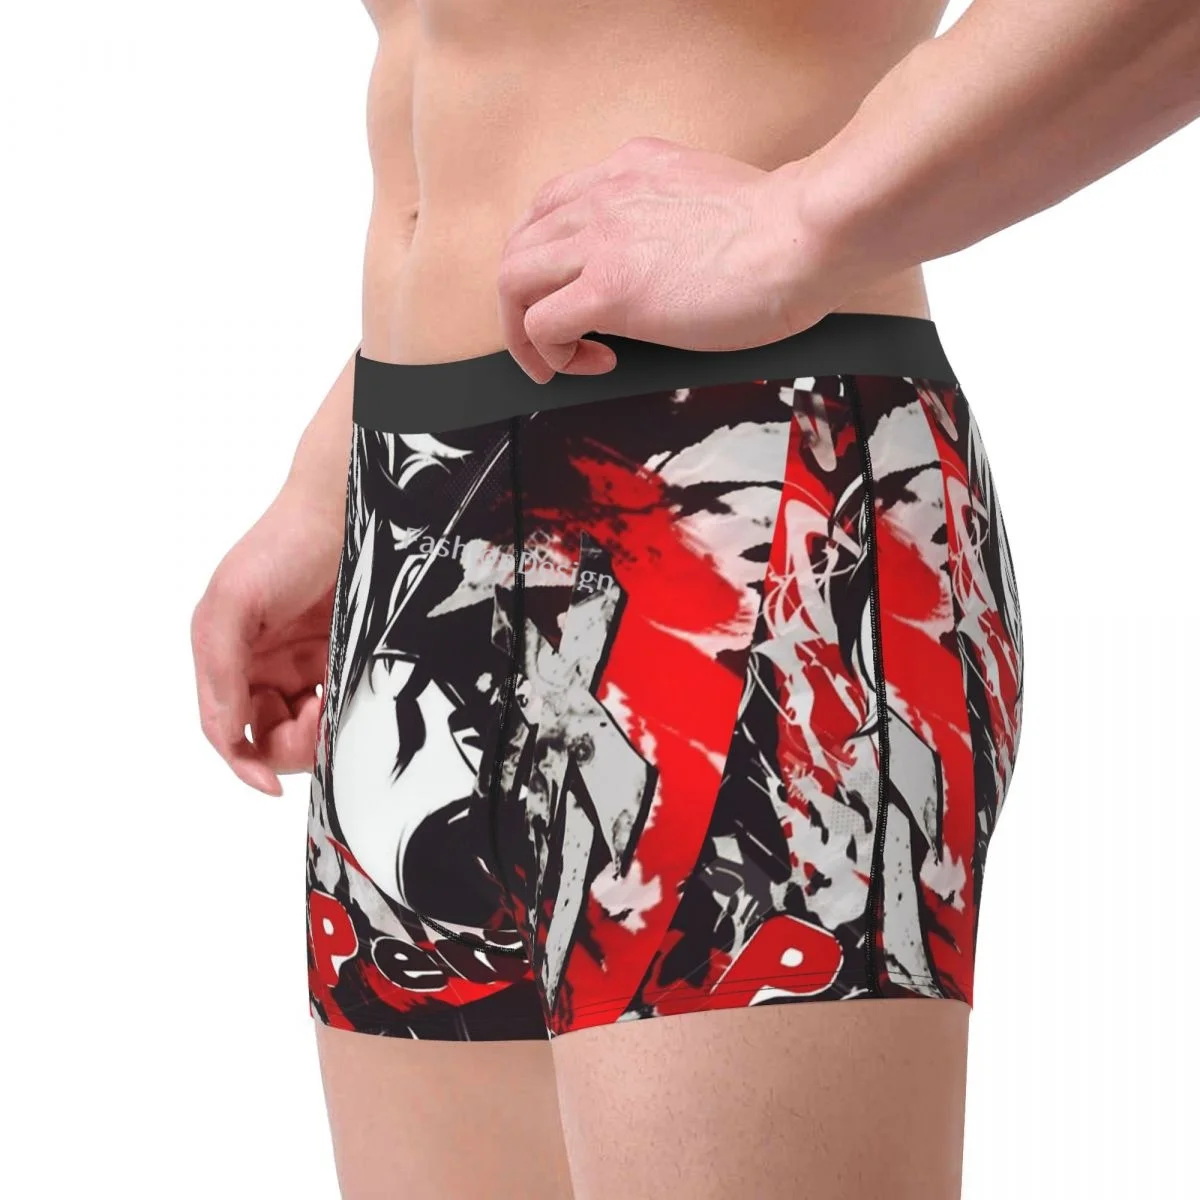 Persona 5 Morgana Game The Side Face Underpants Homme Panties Man Underwear Sexy Shorts Boxer Briefs images - 2